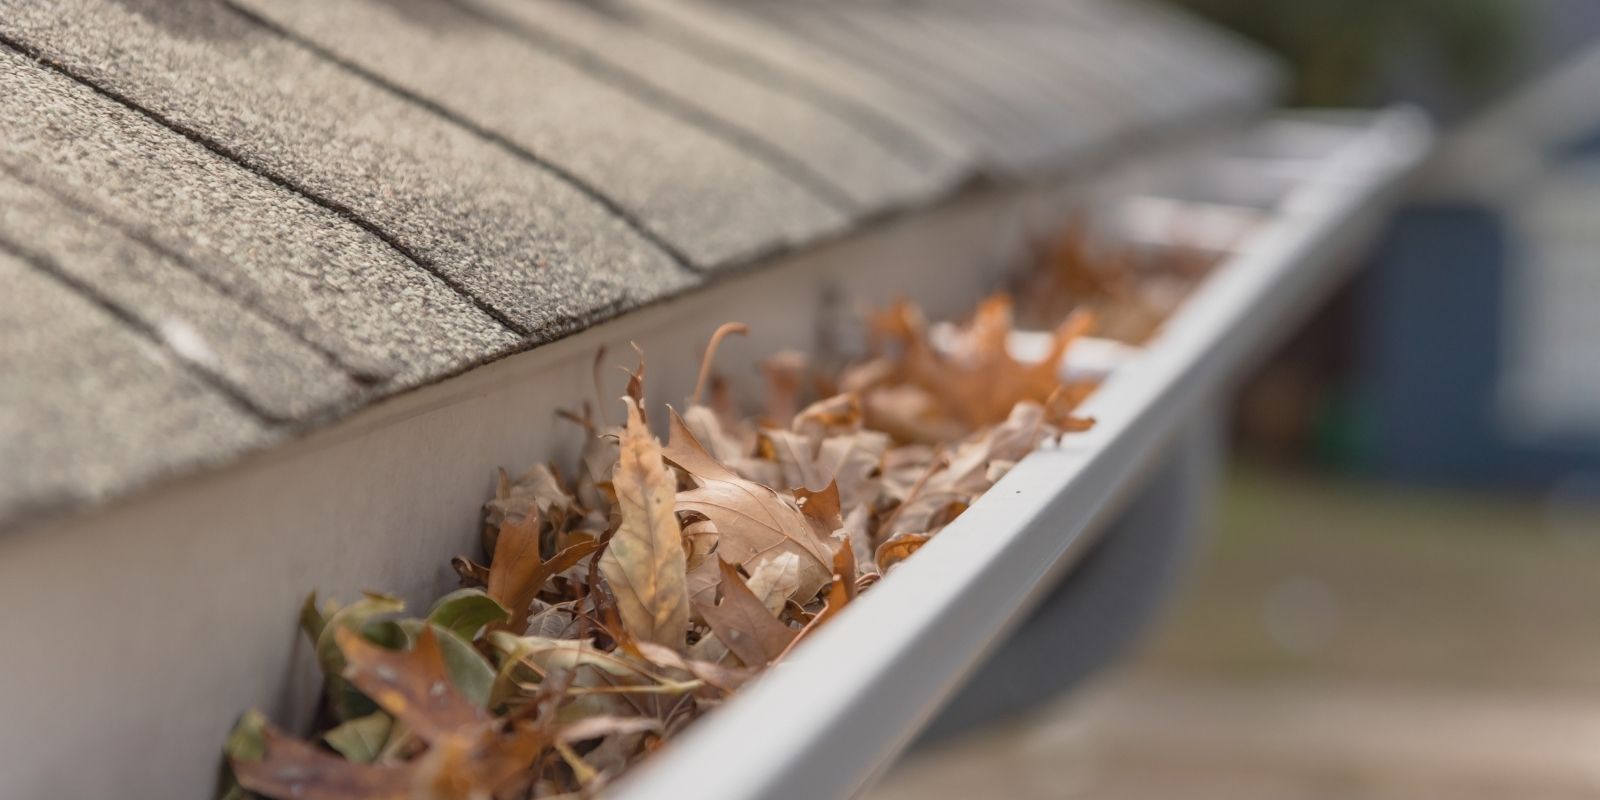 Gutters blocked by leaves and other debris